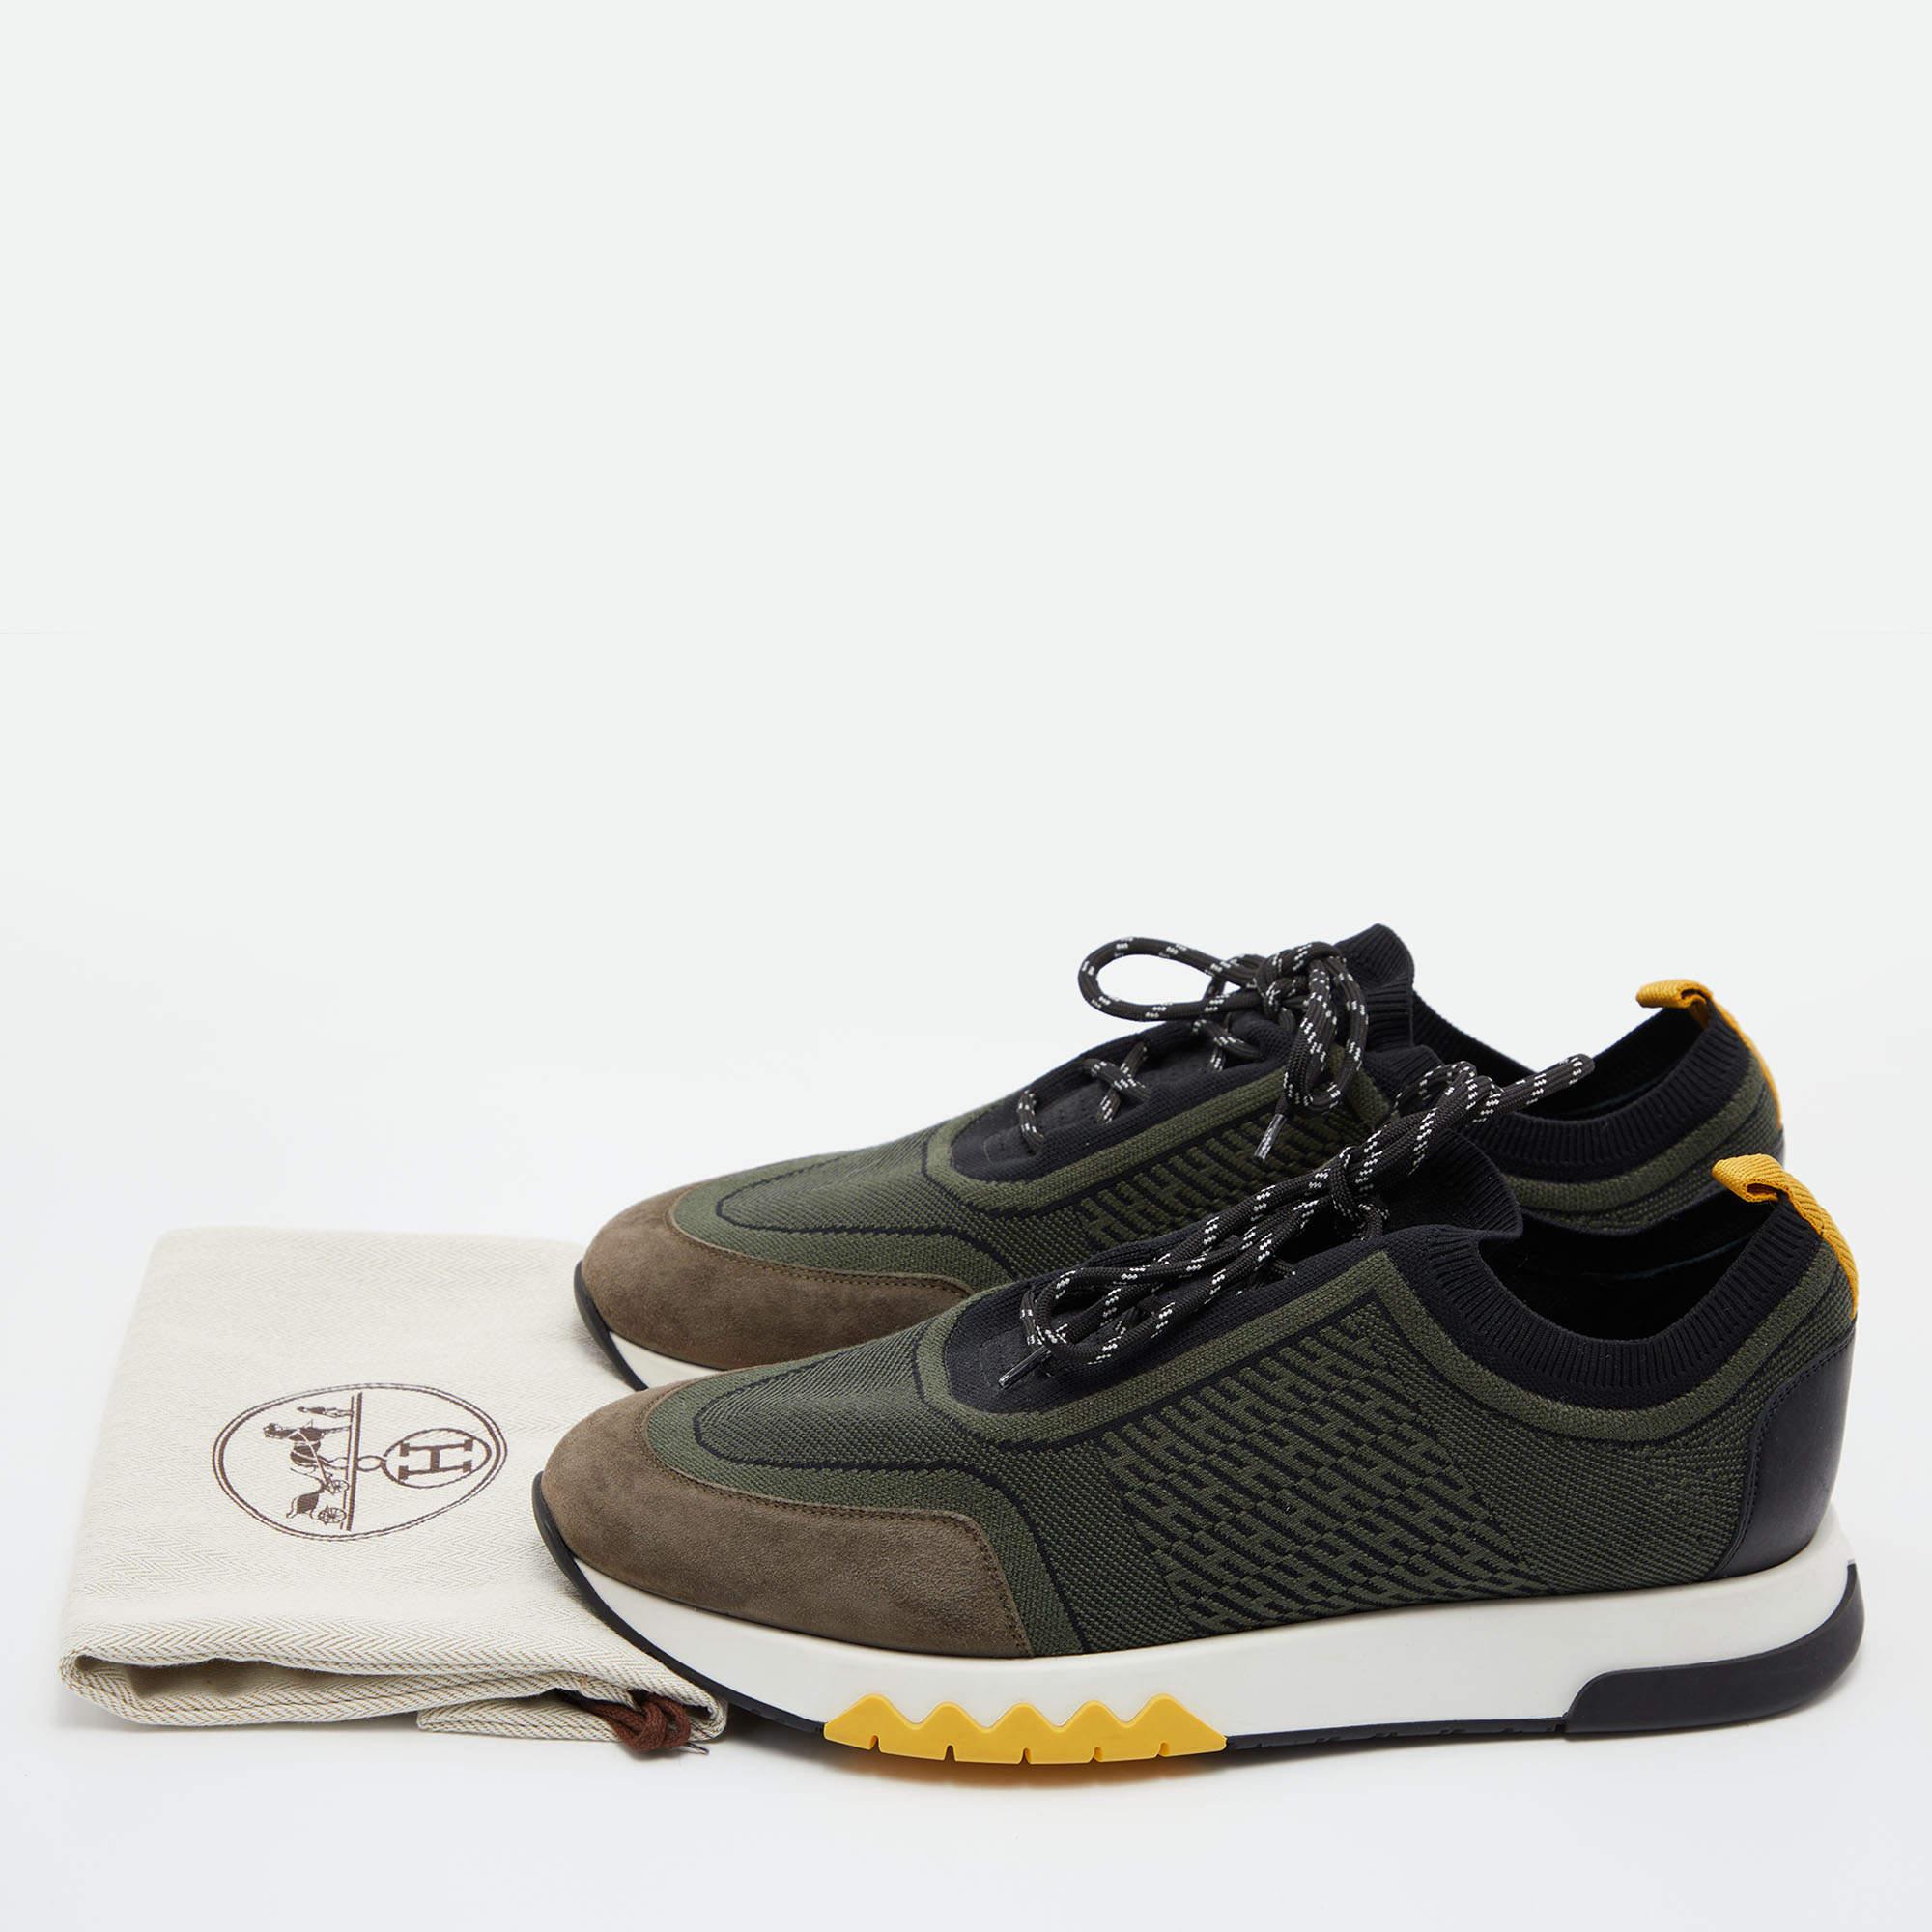 Hermes Green/Black Knit Fabric and Suede C-Addict Sneakers Size 42 5